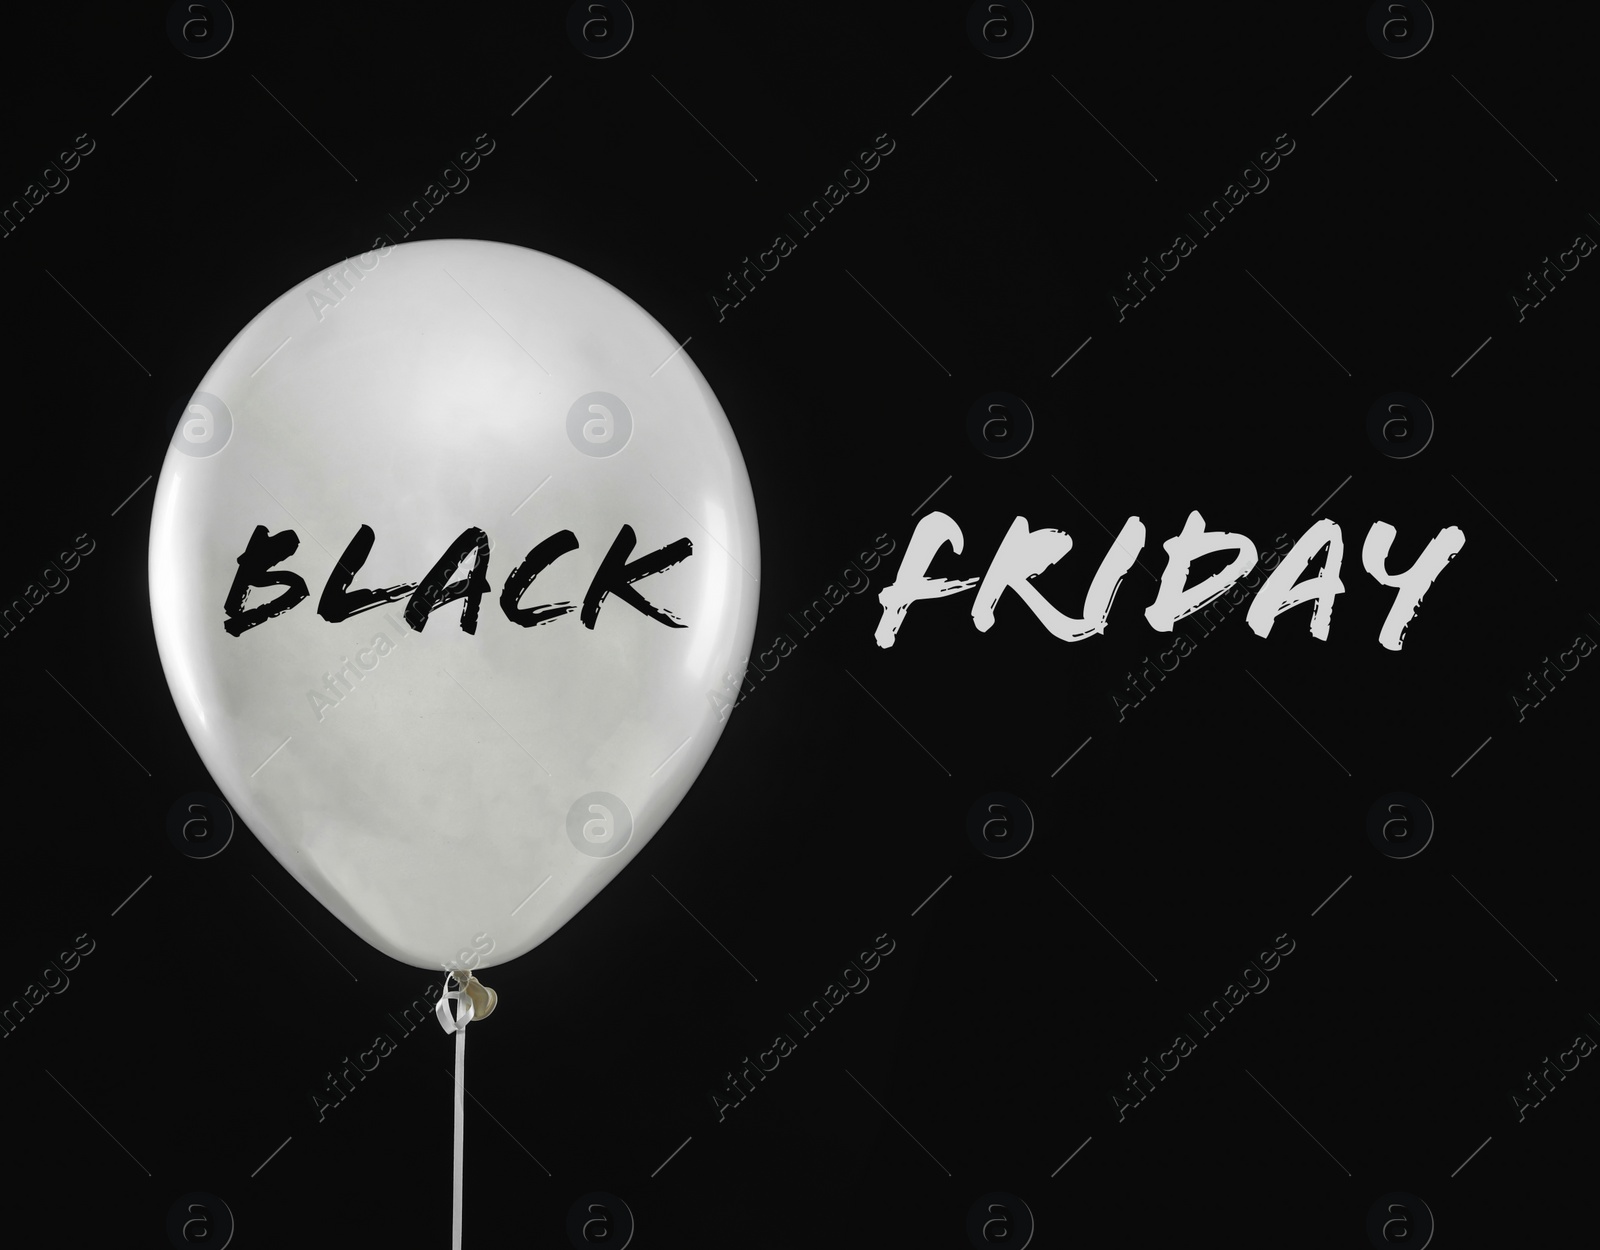 Image of Text BLACK FRIDAY and white balloon on dark background